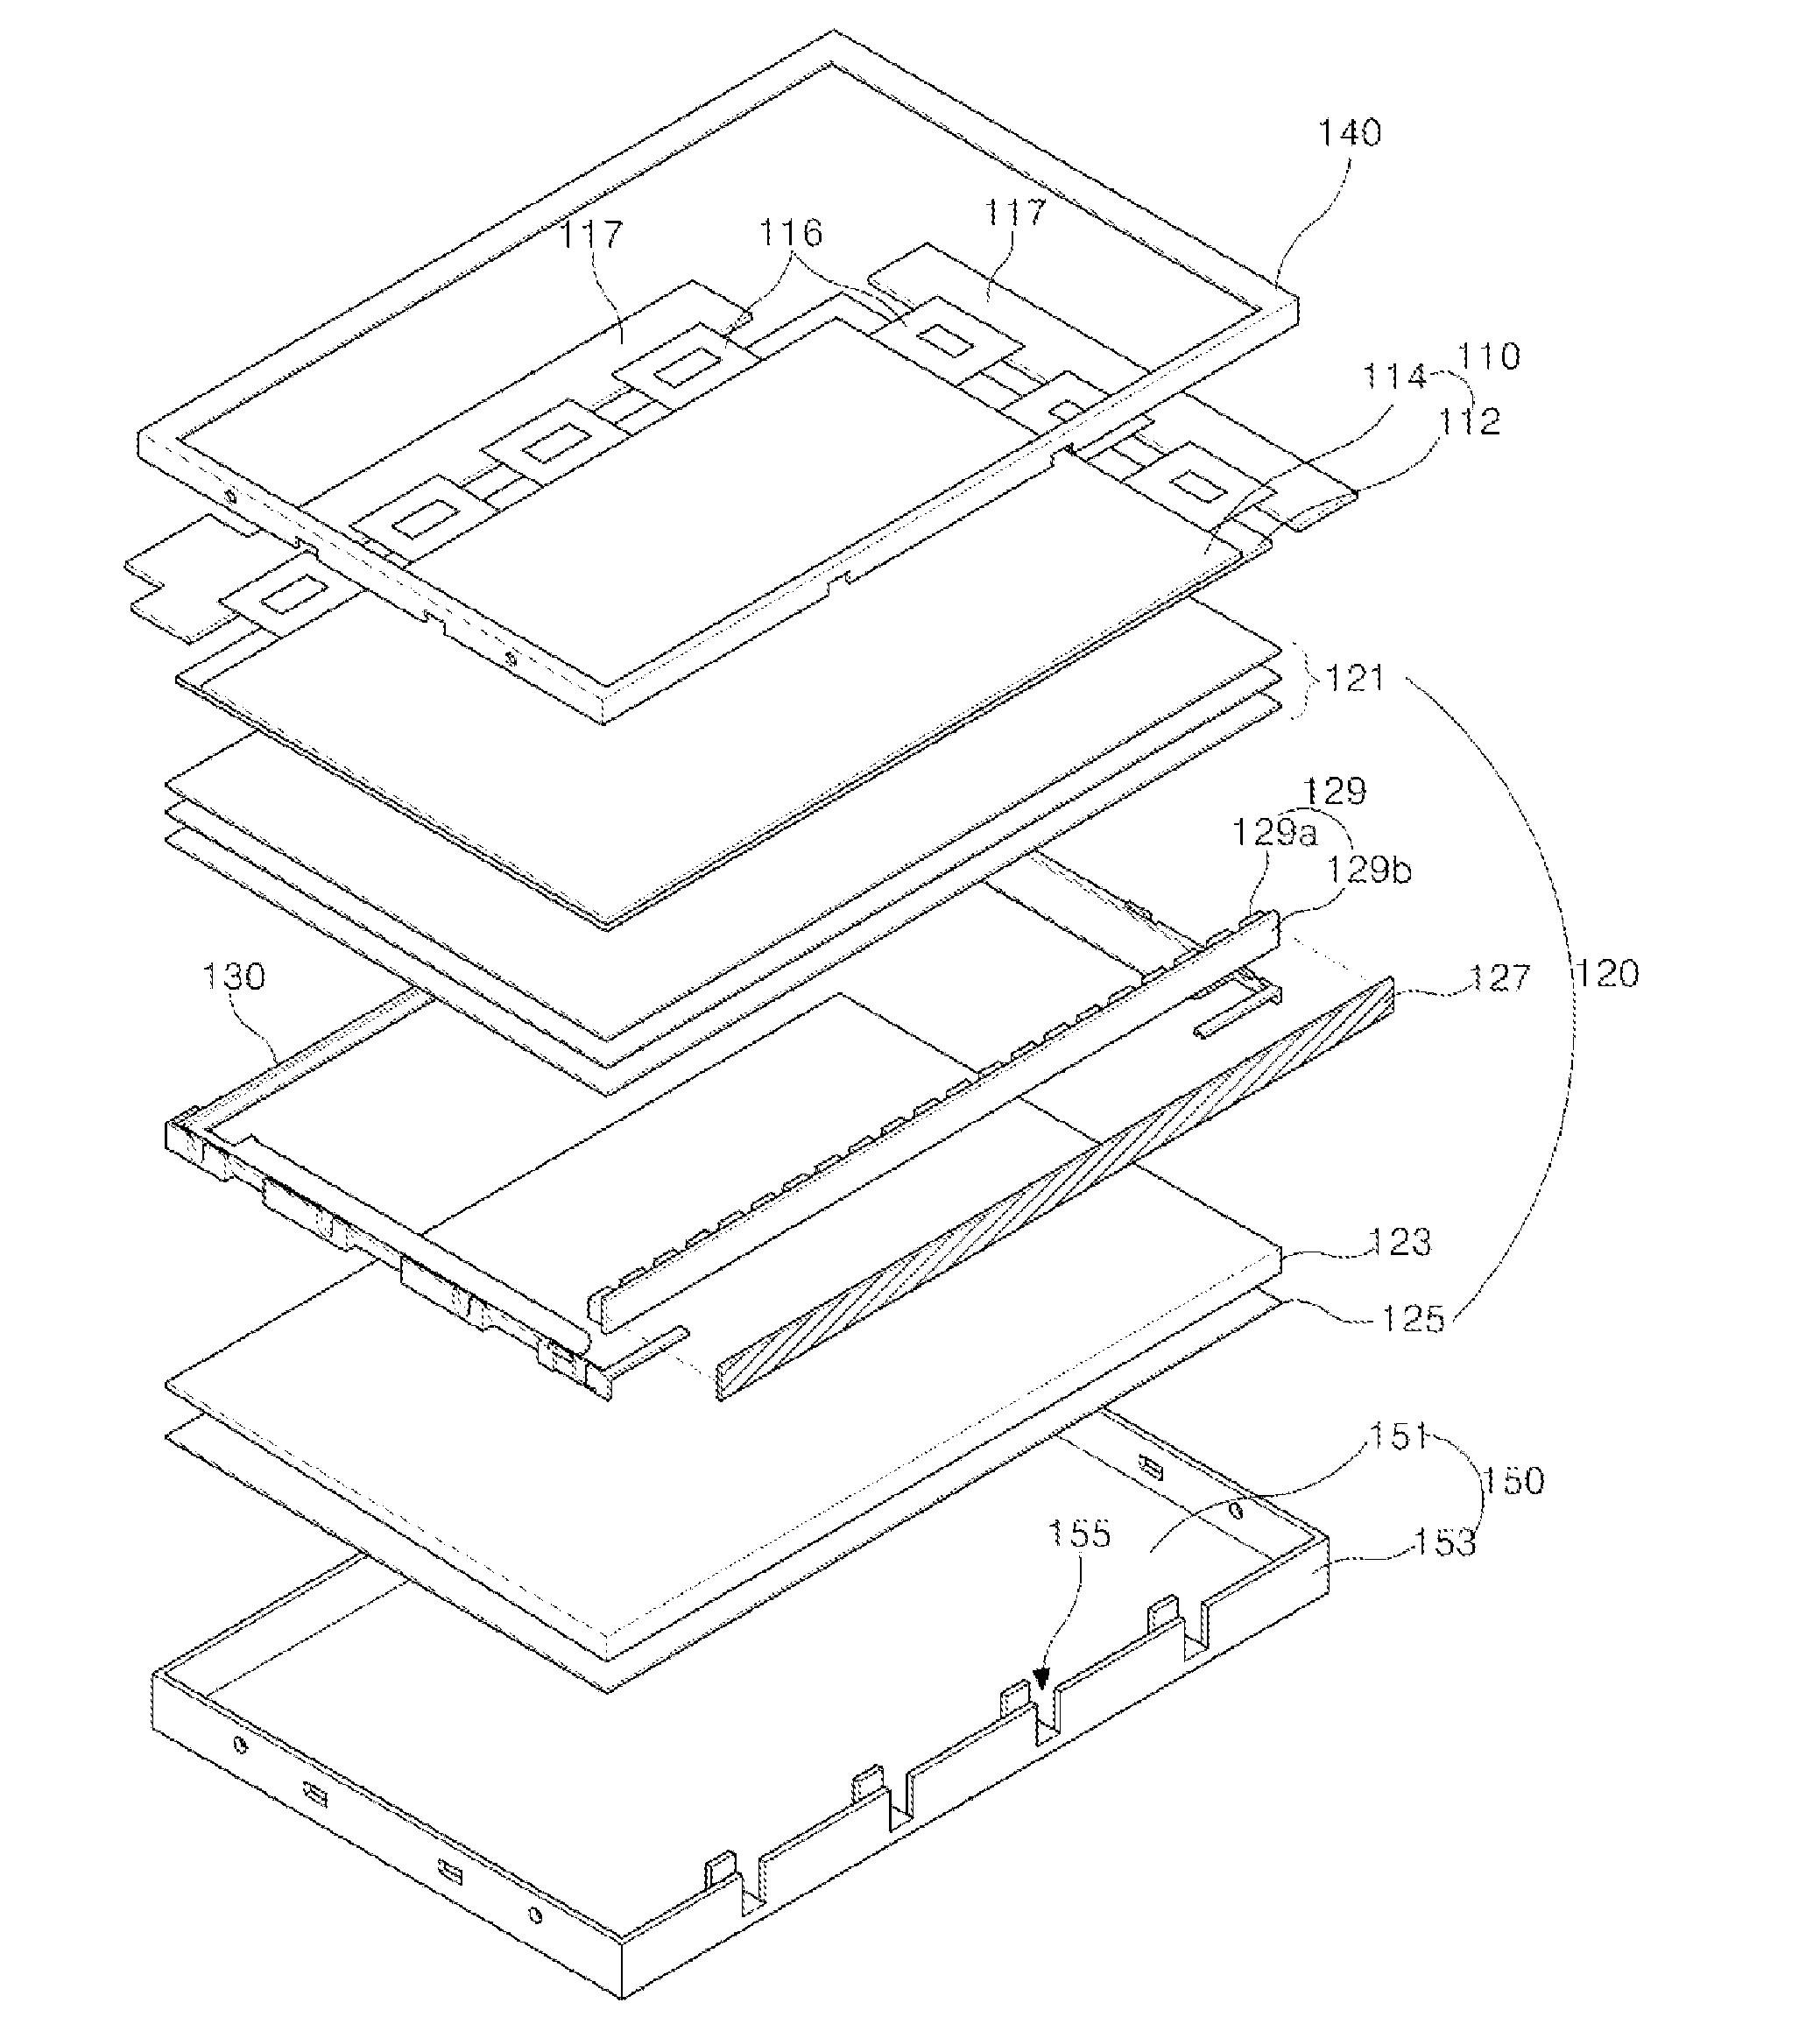 Liquid crystal display device including LED light source